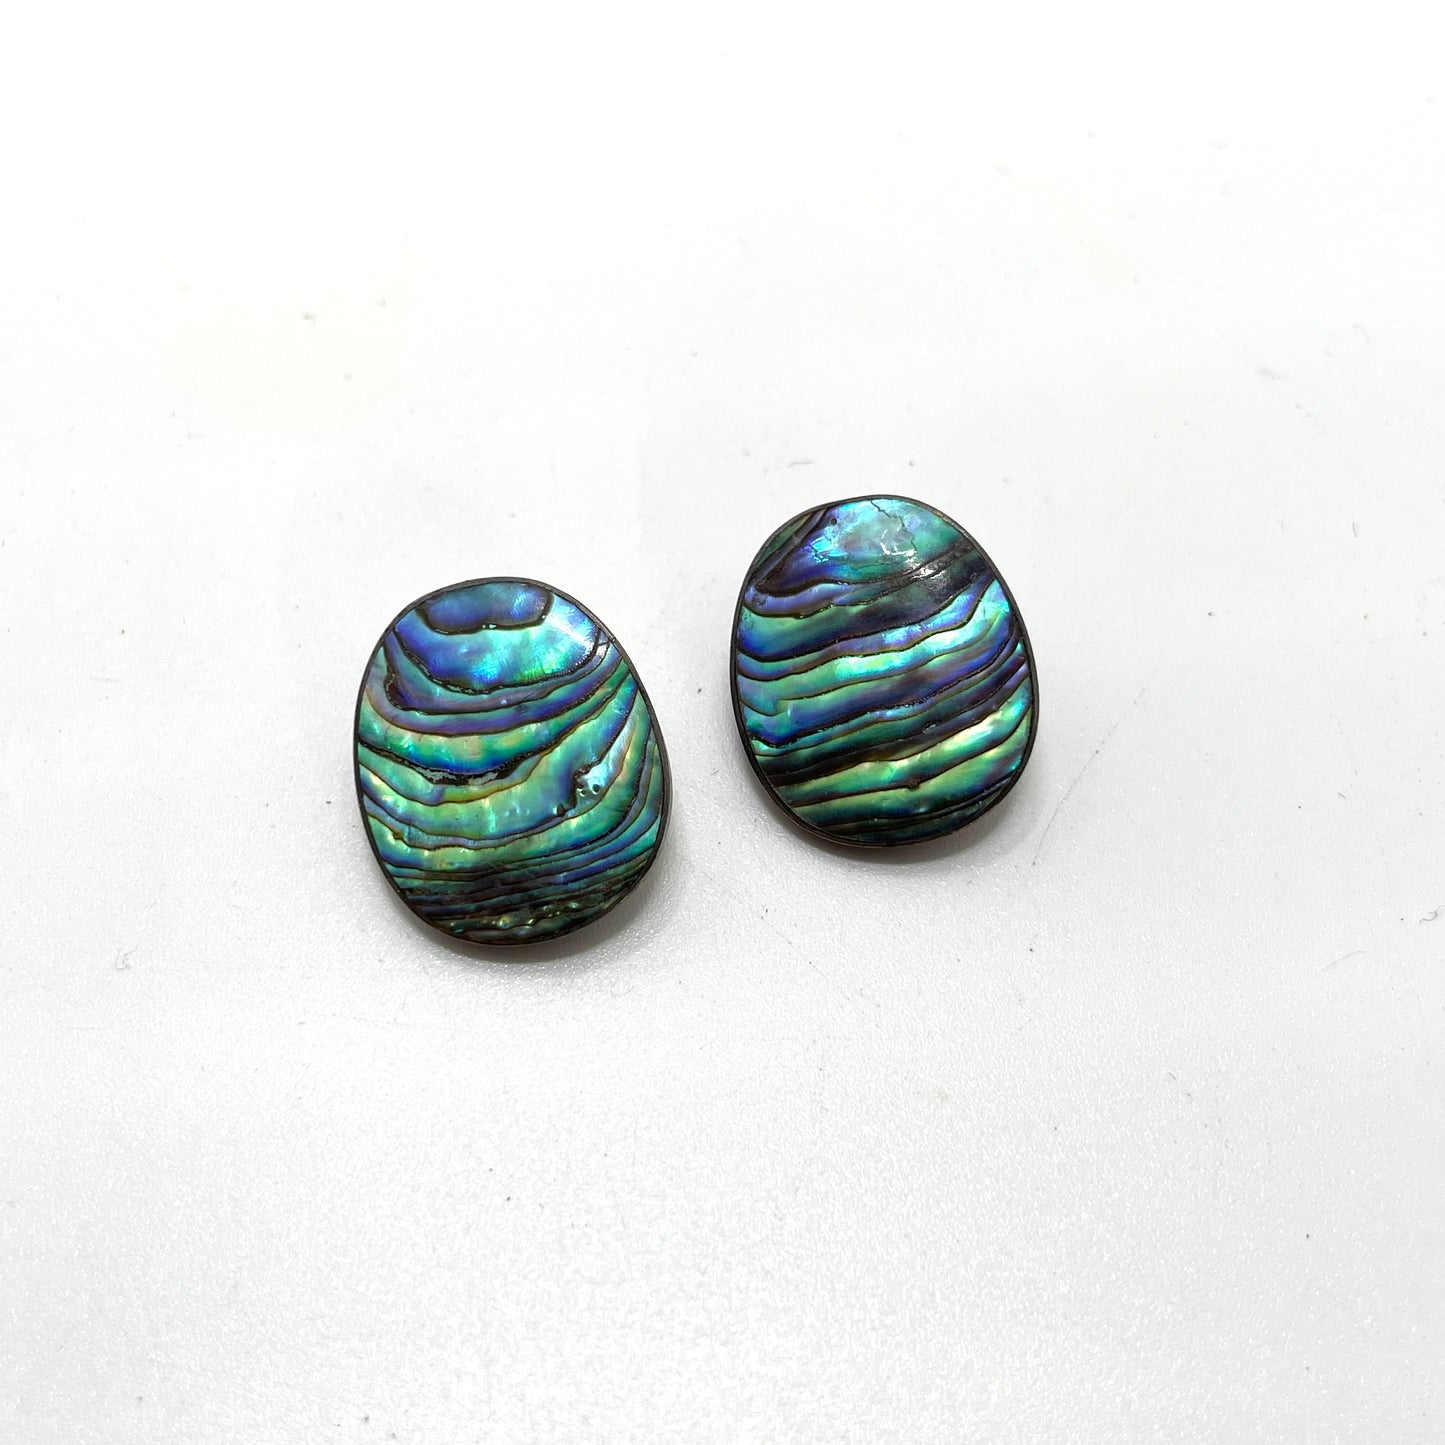 Vintage Abalone Mother of Pearl Clip Earrings